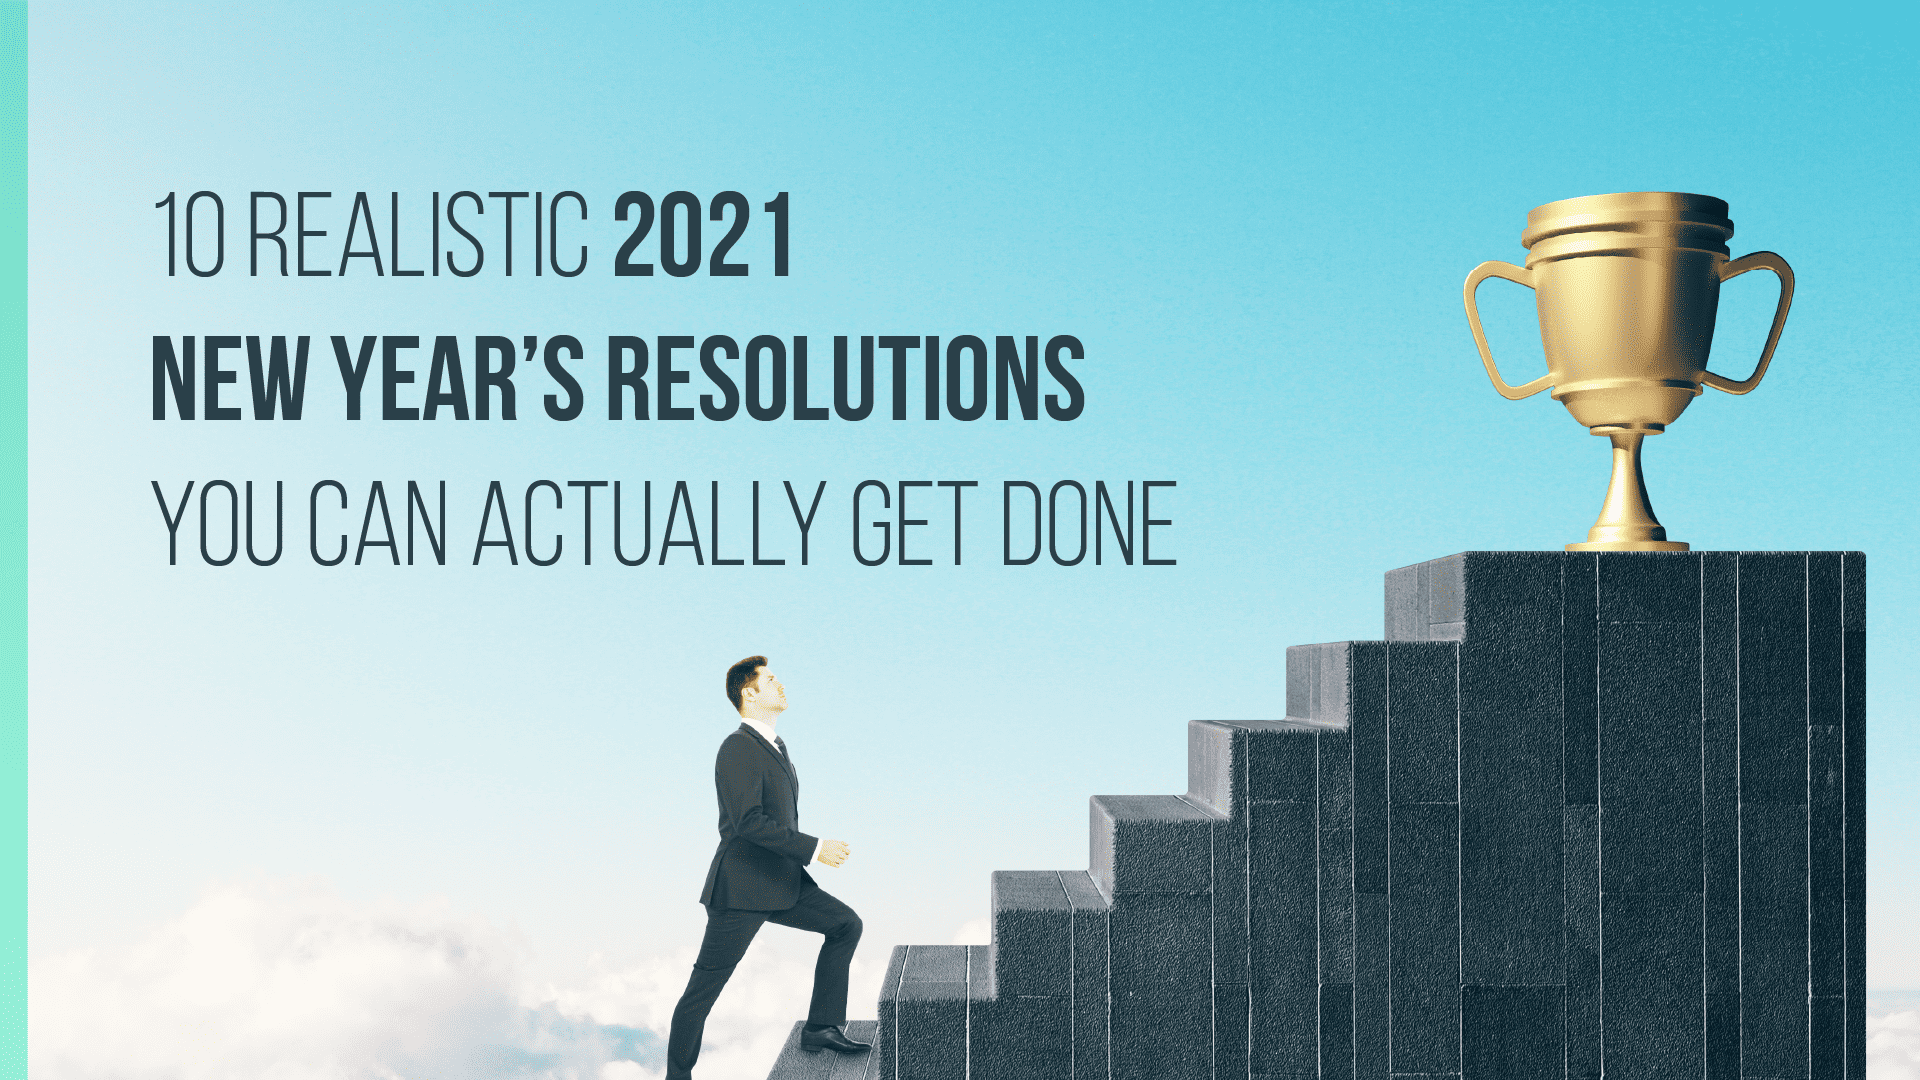 10 Realistic 2021 New Year’s Resolutions You Can Actually Get Done